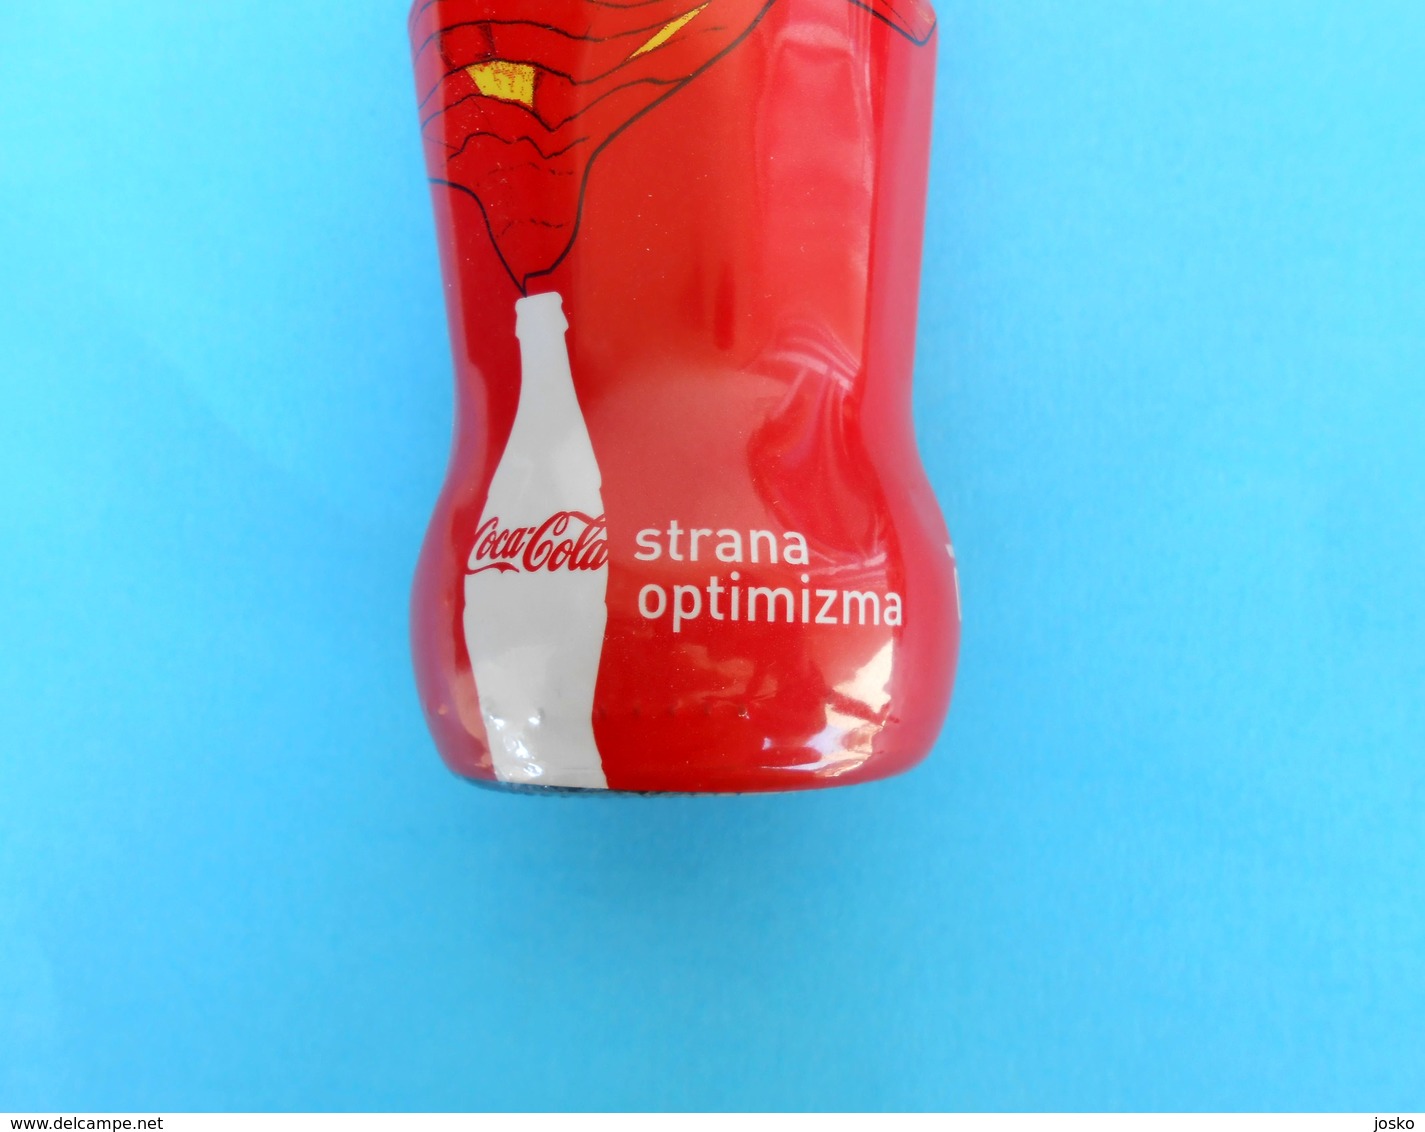 CROATIAN ISSUE ... SIDE OF OPTIMISM No.1 ... Coca-Cola FULL Wrapped Glass Bottle 0.25l  RRRR - Botellas